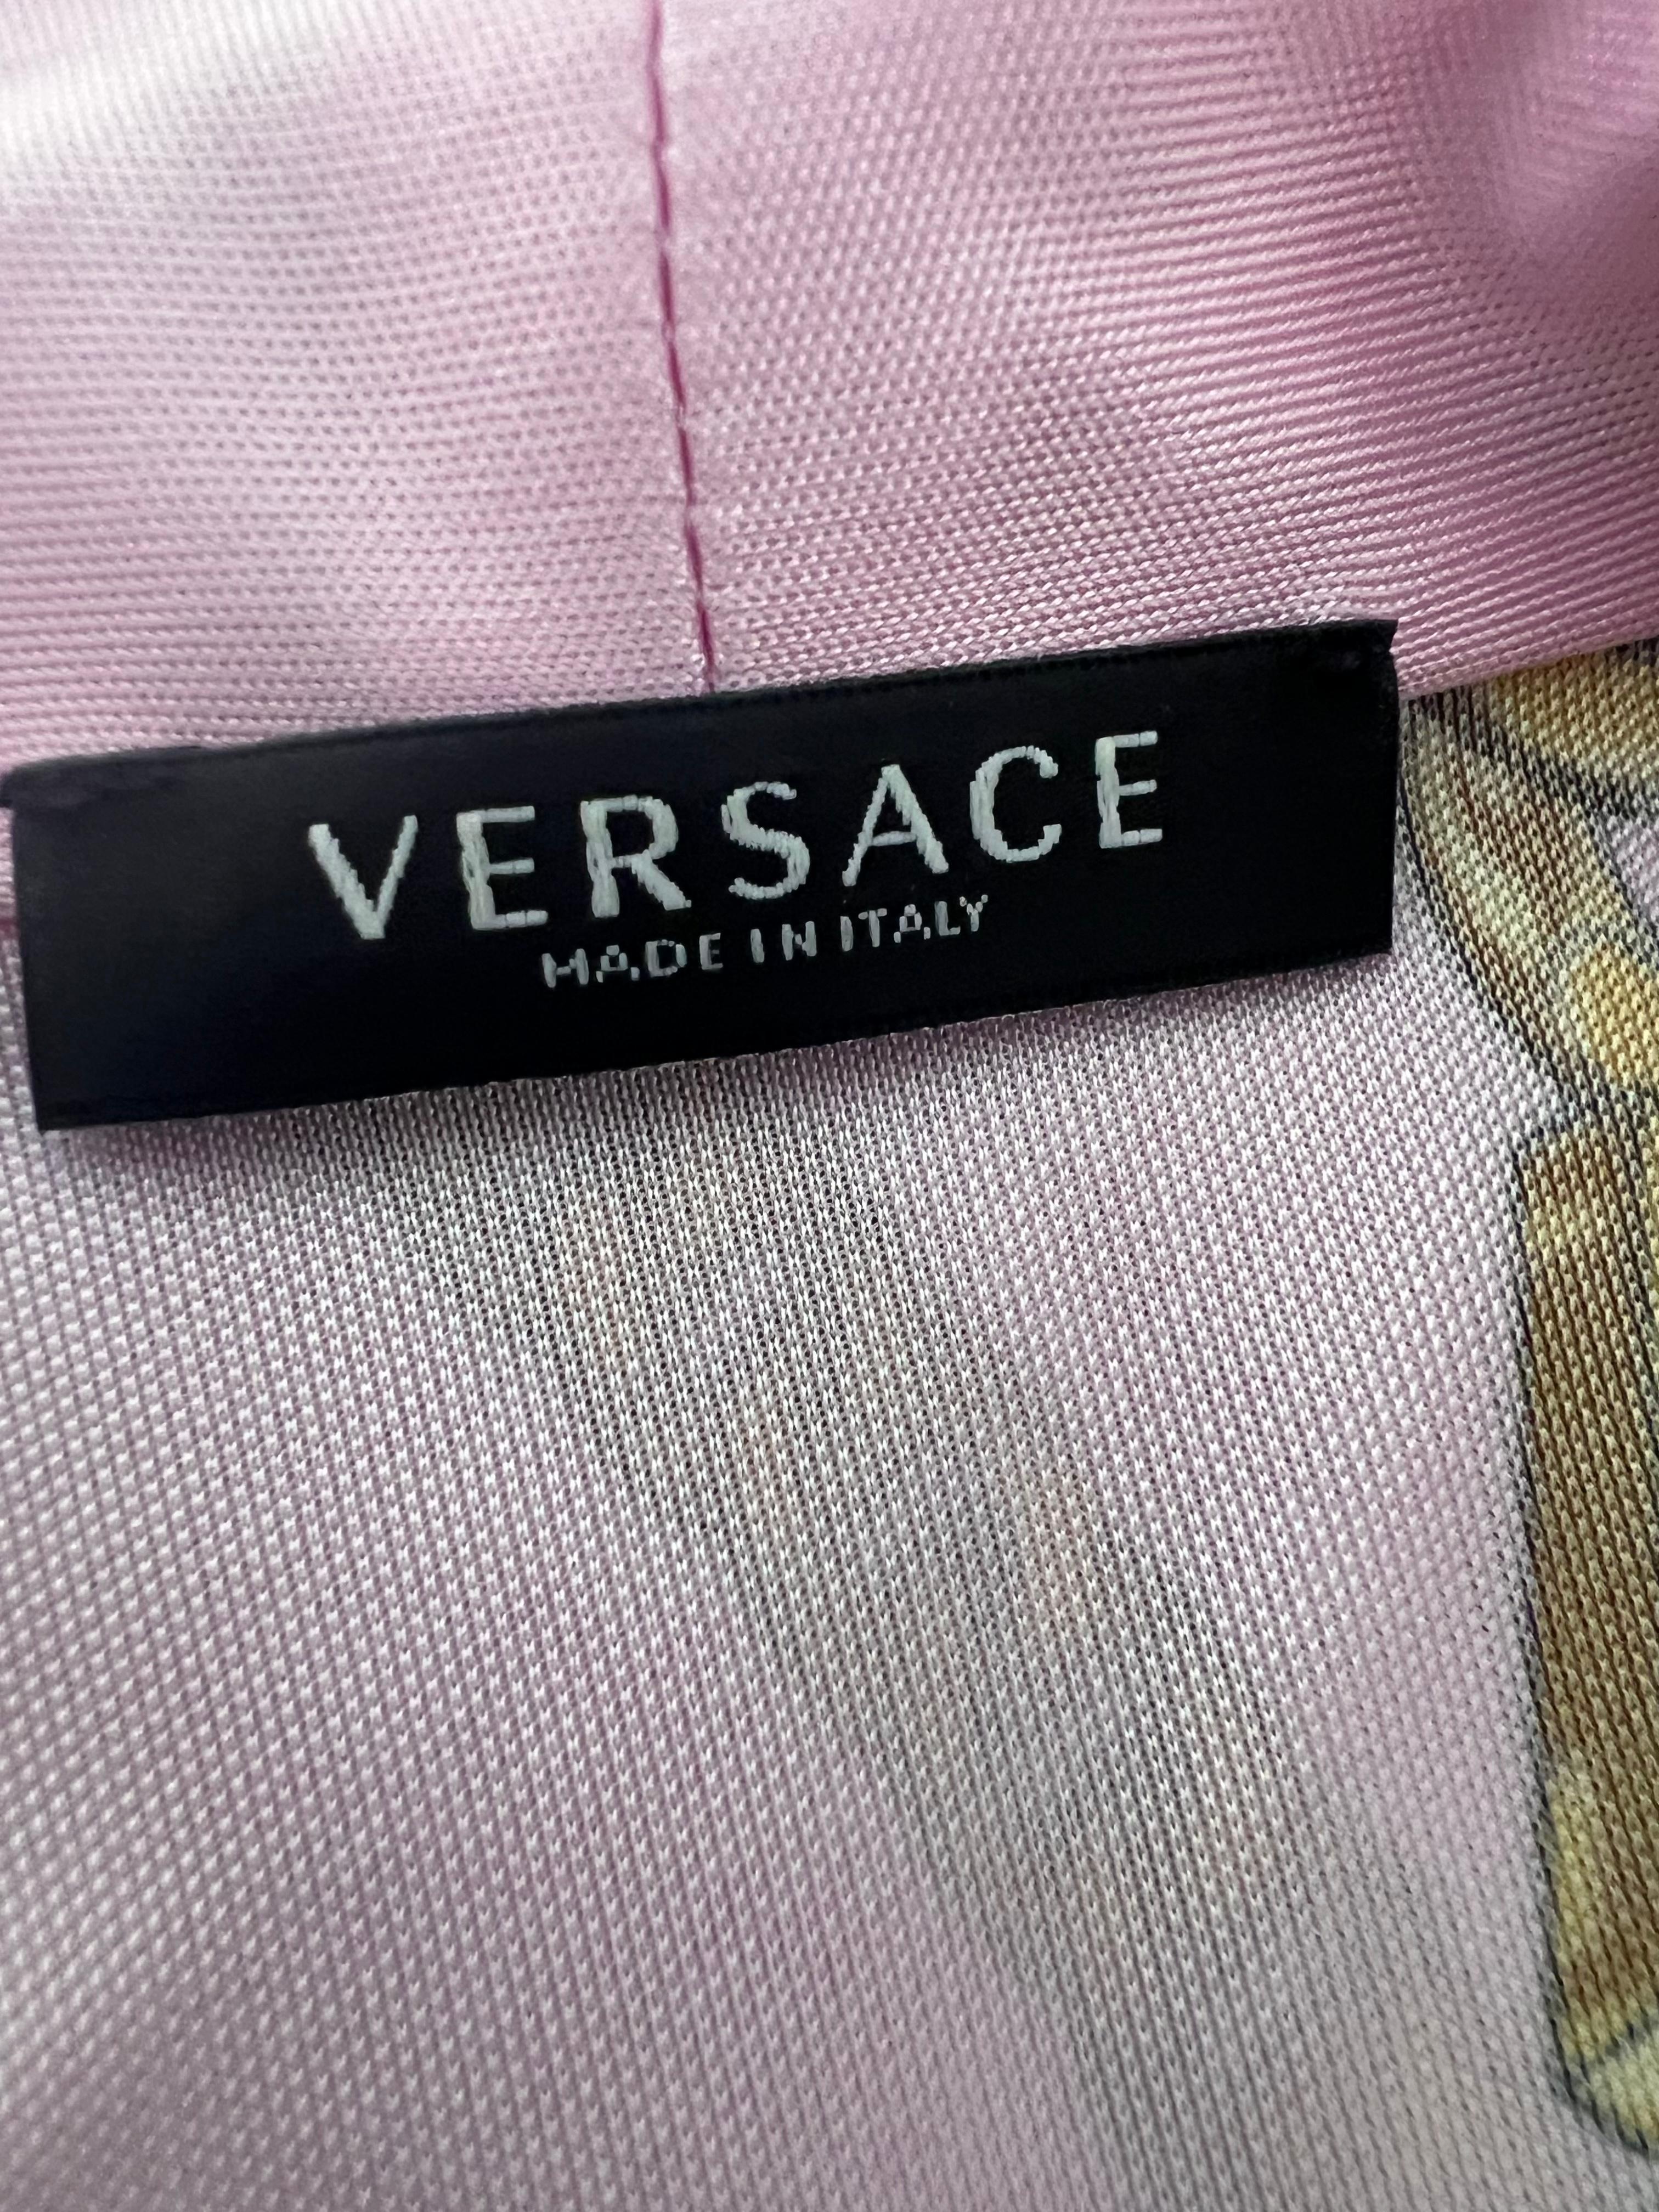 Versace Chain Long Sleeve Pink Bodysuit For Sale 3